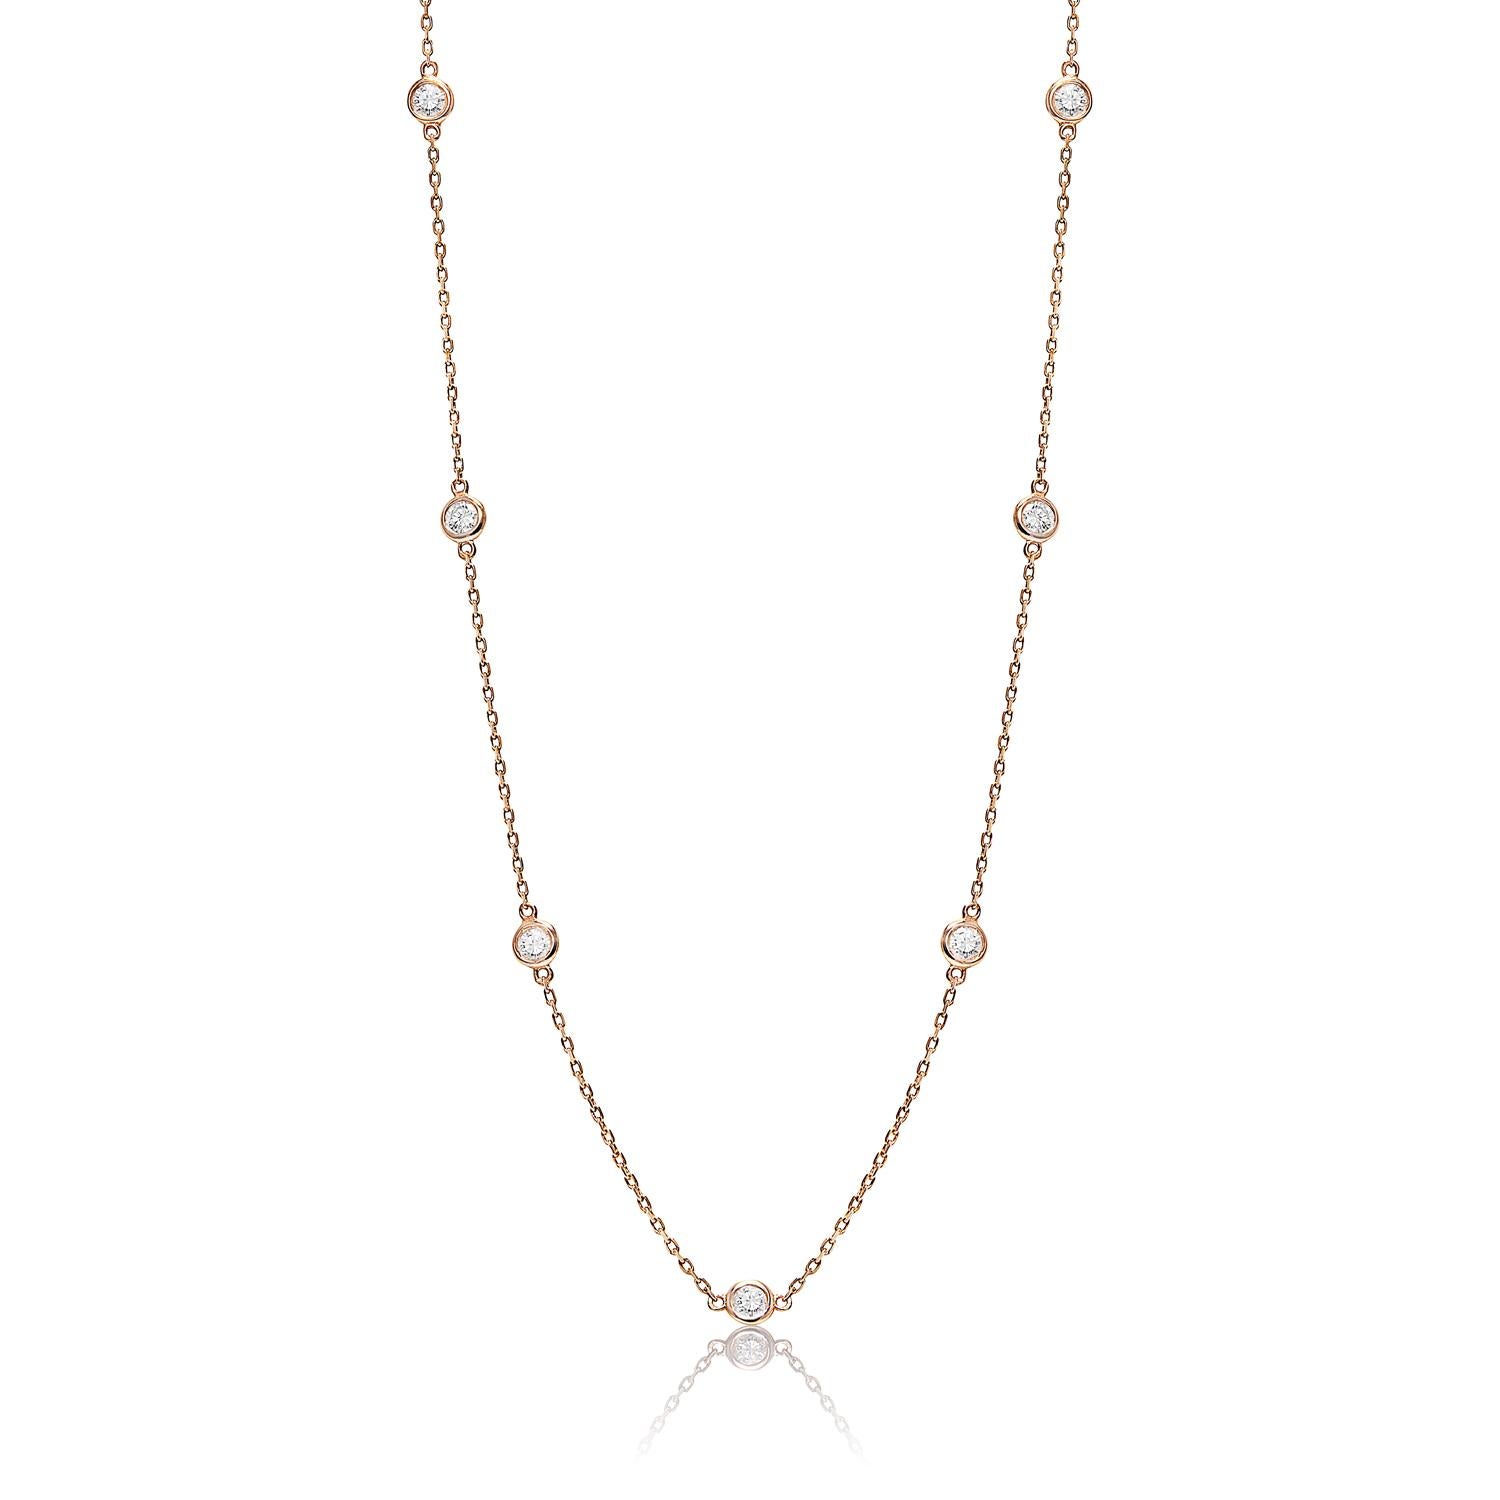 ​Looking for an exquisite diamond station necklace that will make you feel like a million bucks? Then look no further than this gorgeous Earth-Mined Diamond Necklace. Featuring a round brilliant cut station diamond for ladies with a total of 10